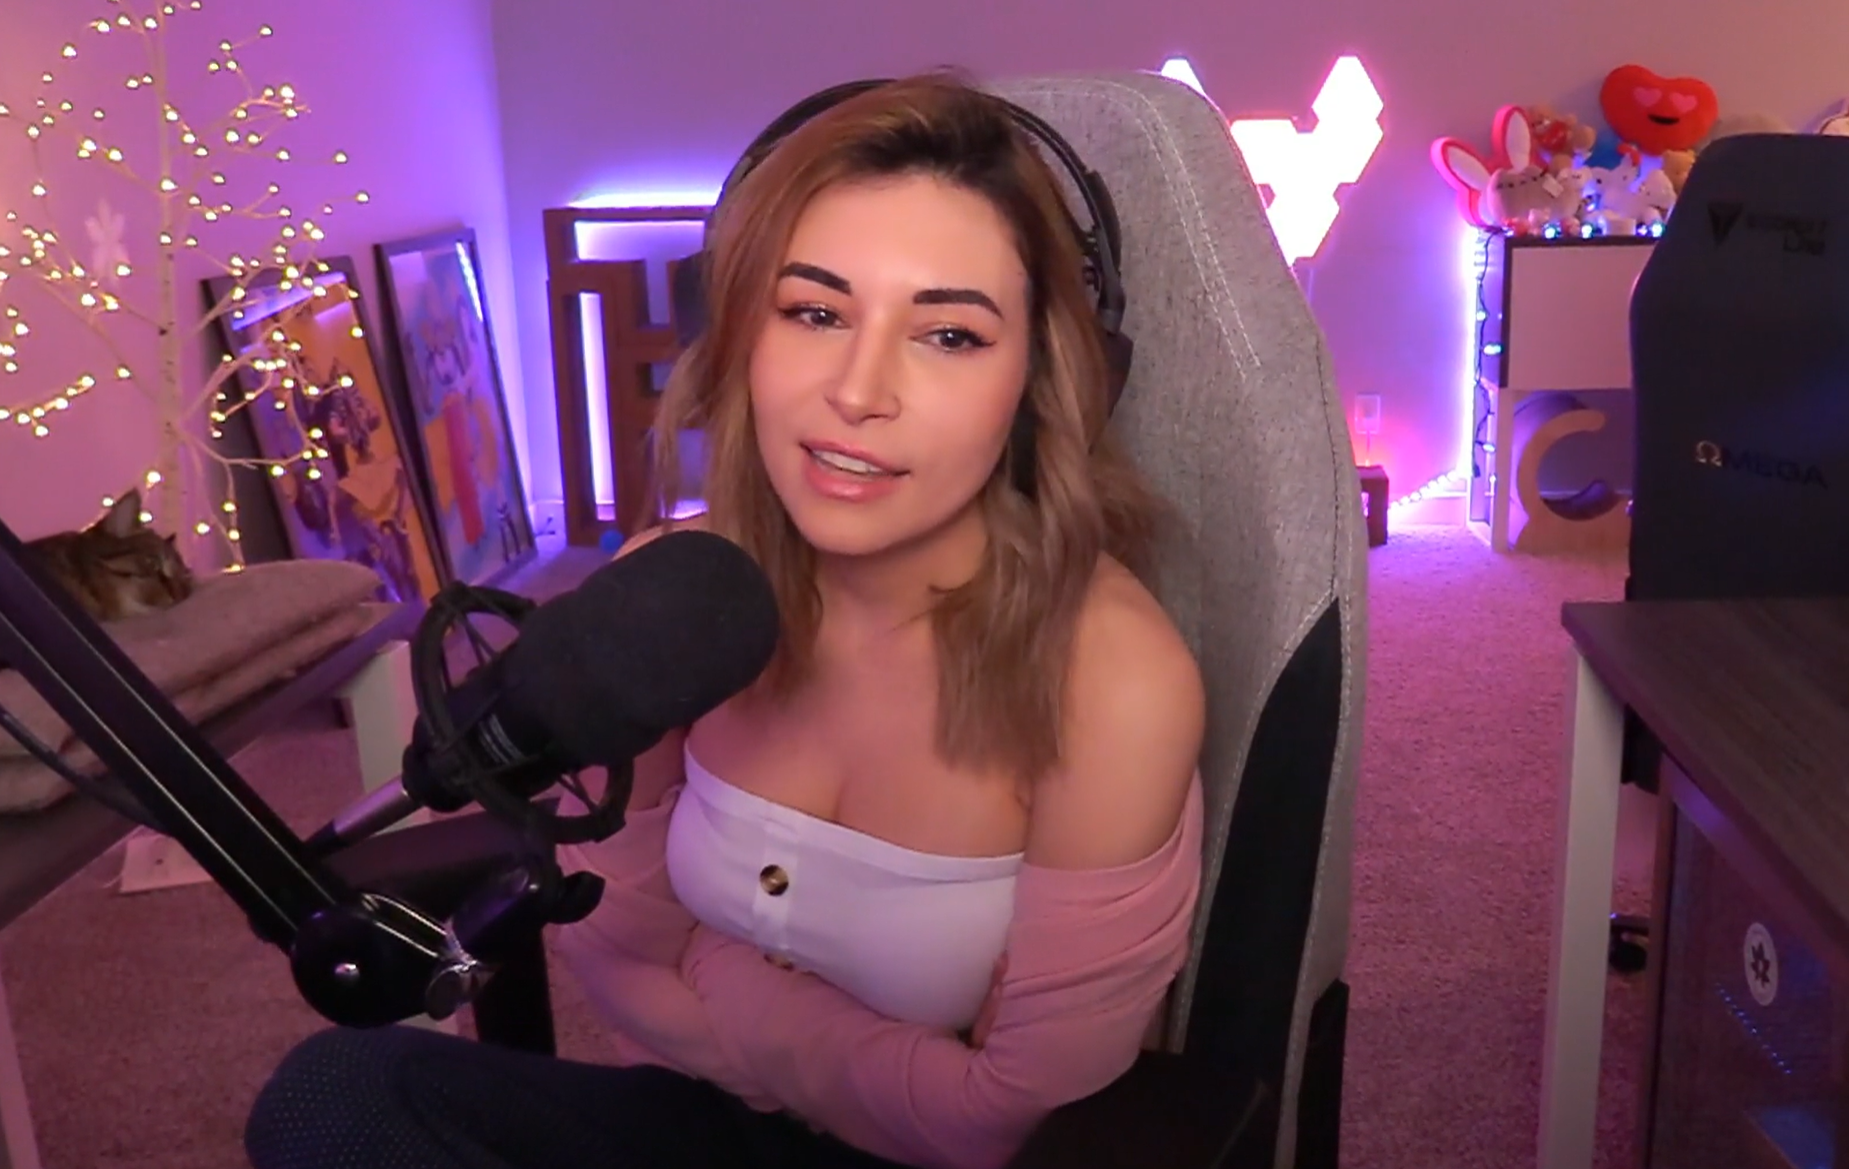 Alinity unbanned from Twitch after 24 hours.